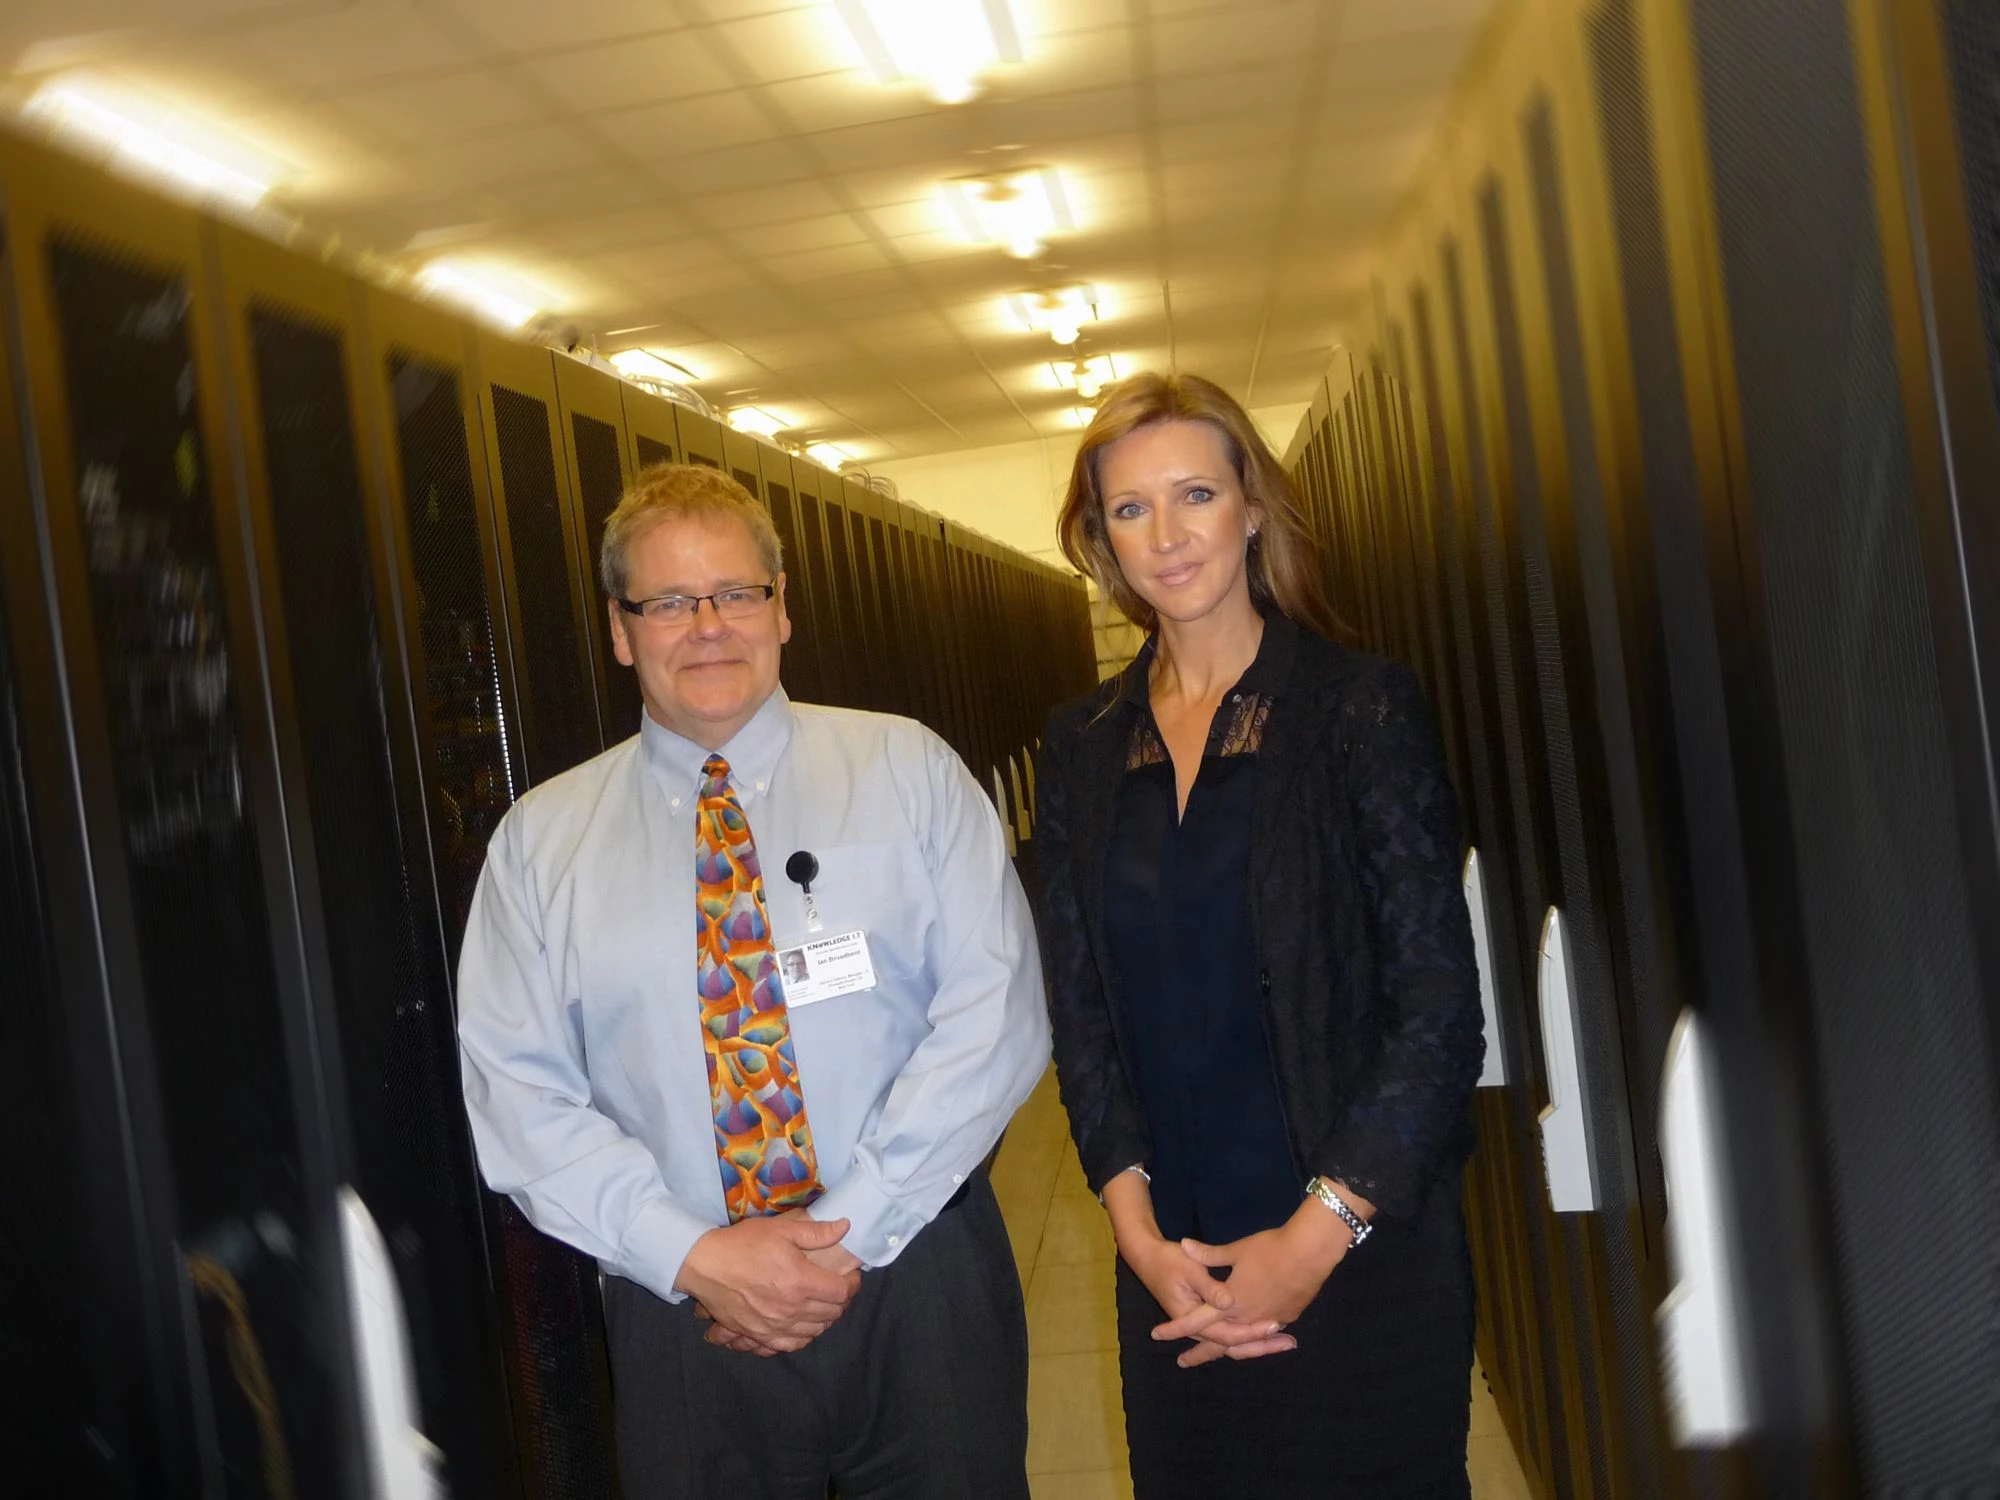 Ian Broadbent, Service Delivery Manager (Pinnacle People) & Belinda Kent, Business Manager for Cloud